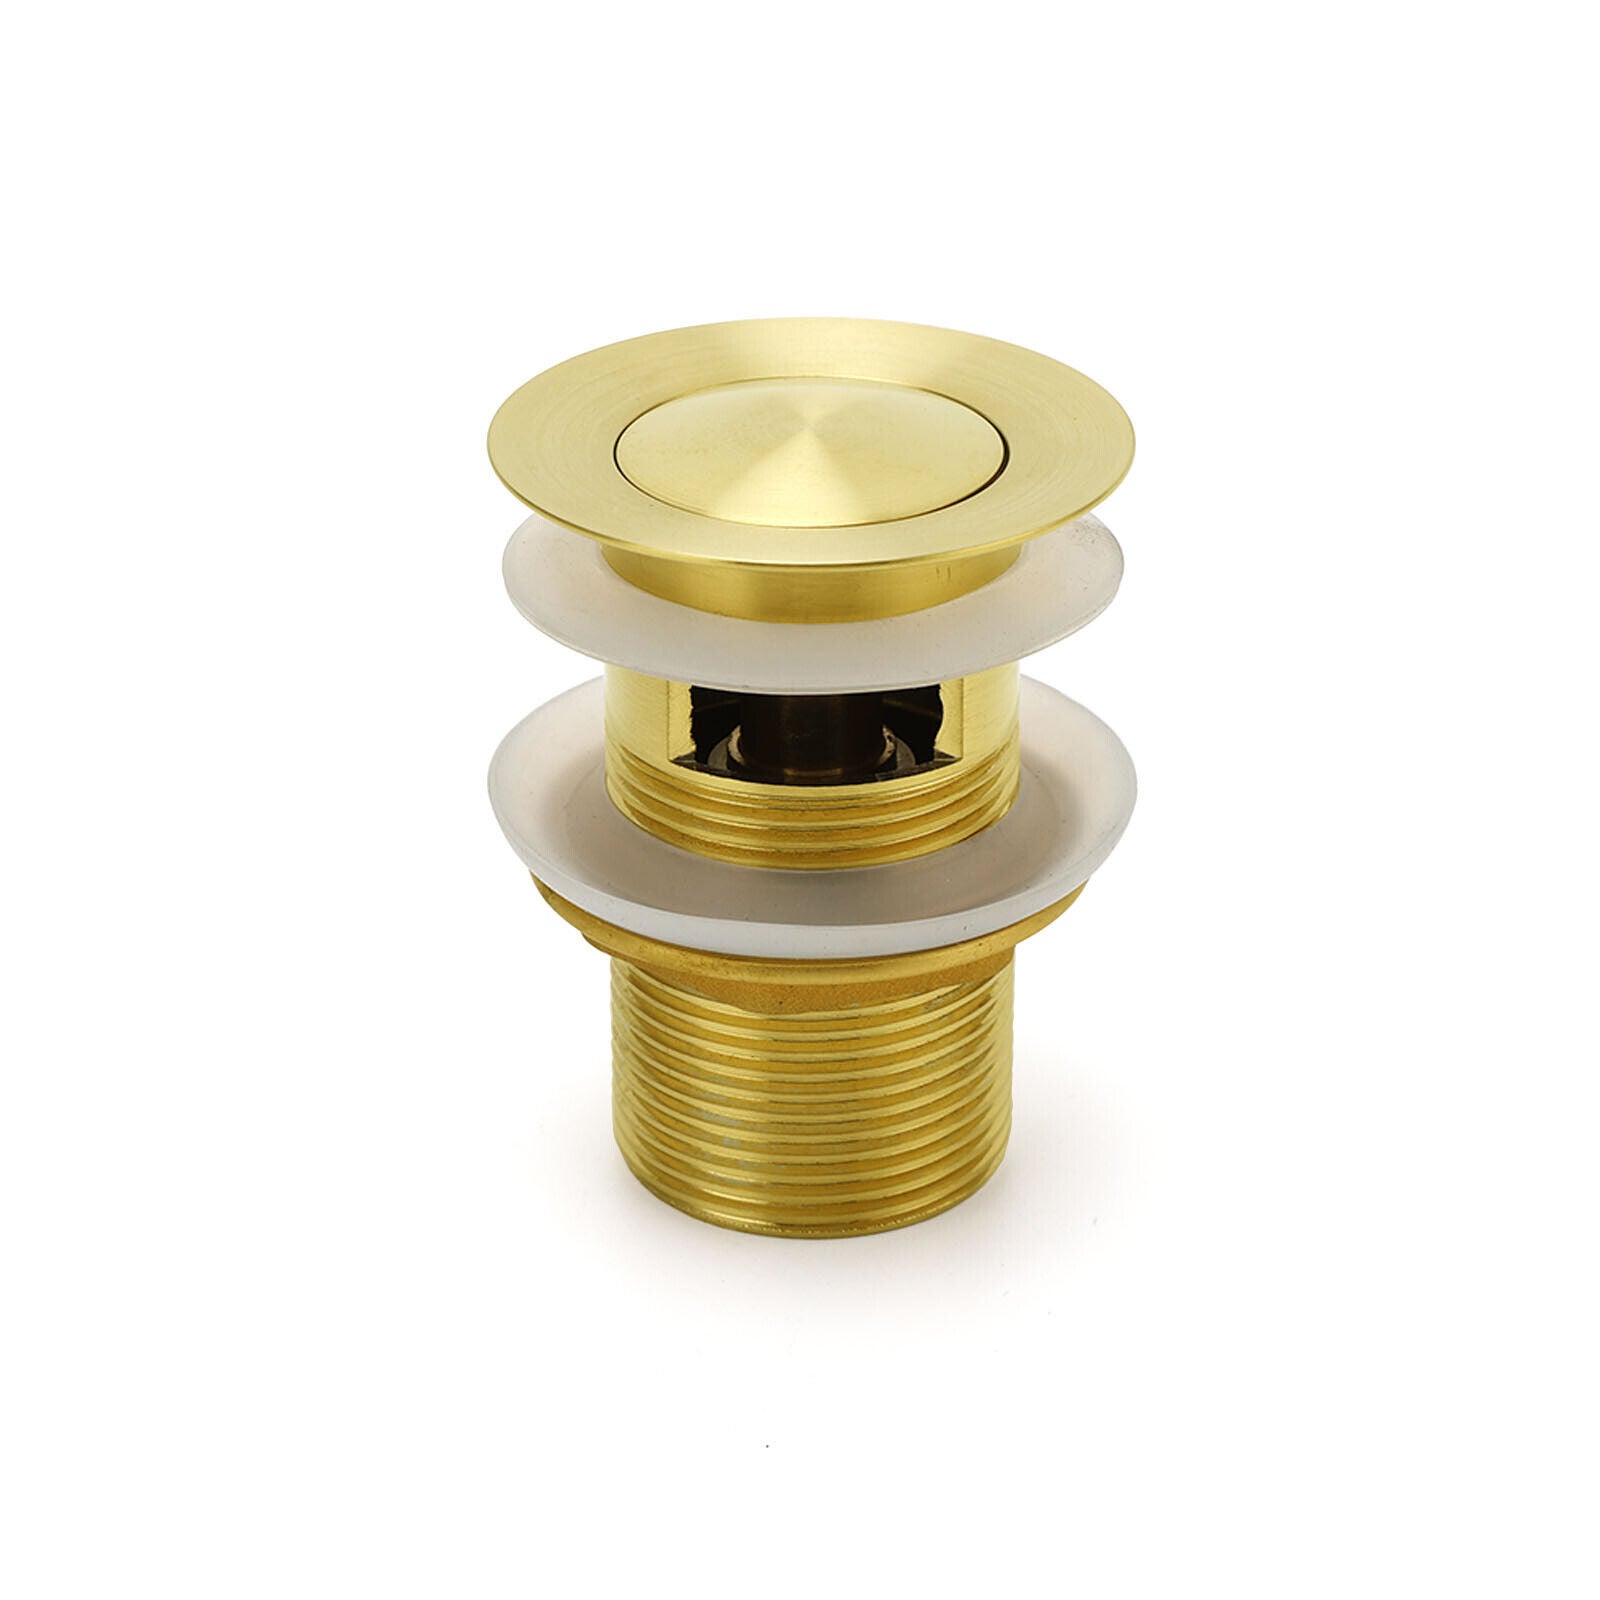 Brushed Gold 32mm Pop Up Push Waste Plug With Overflow Basin Sink Drain Outlet